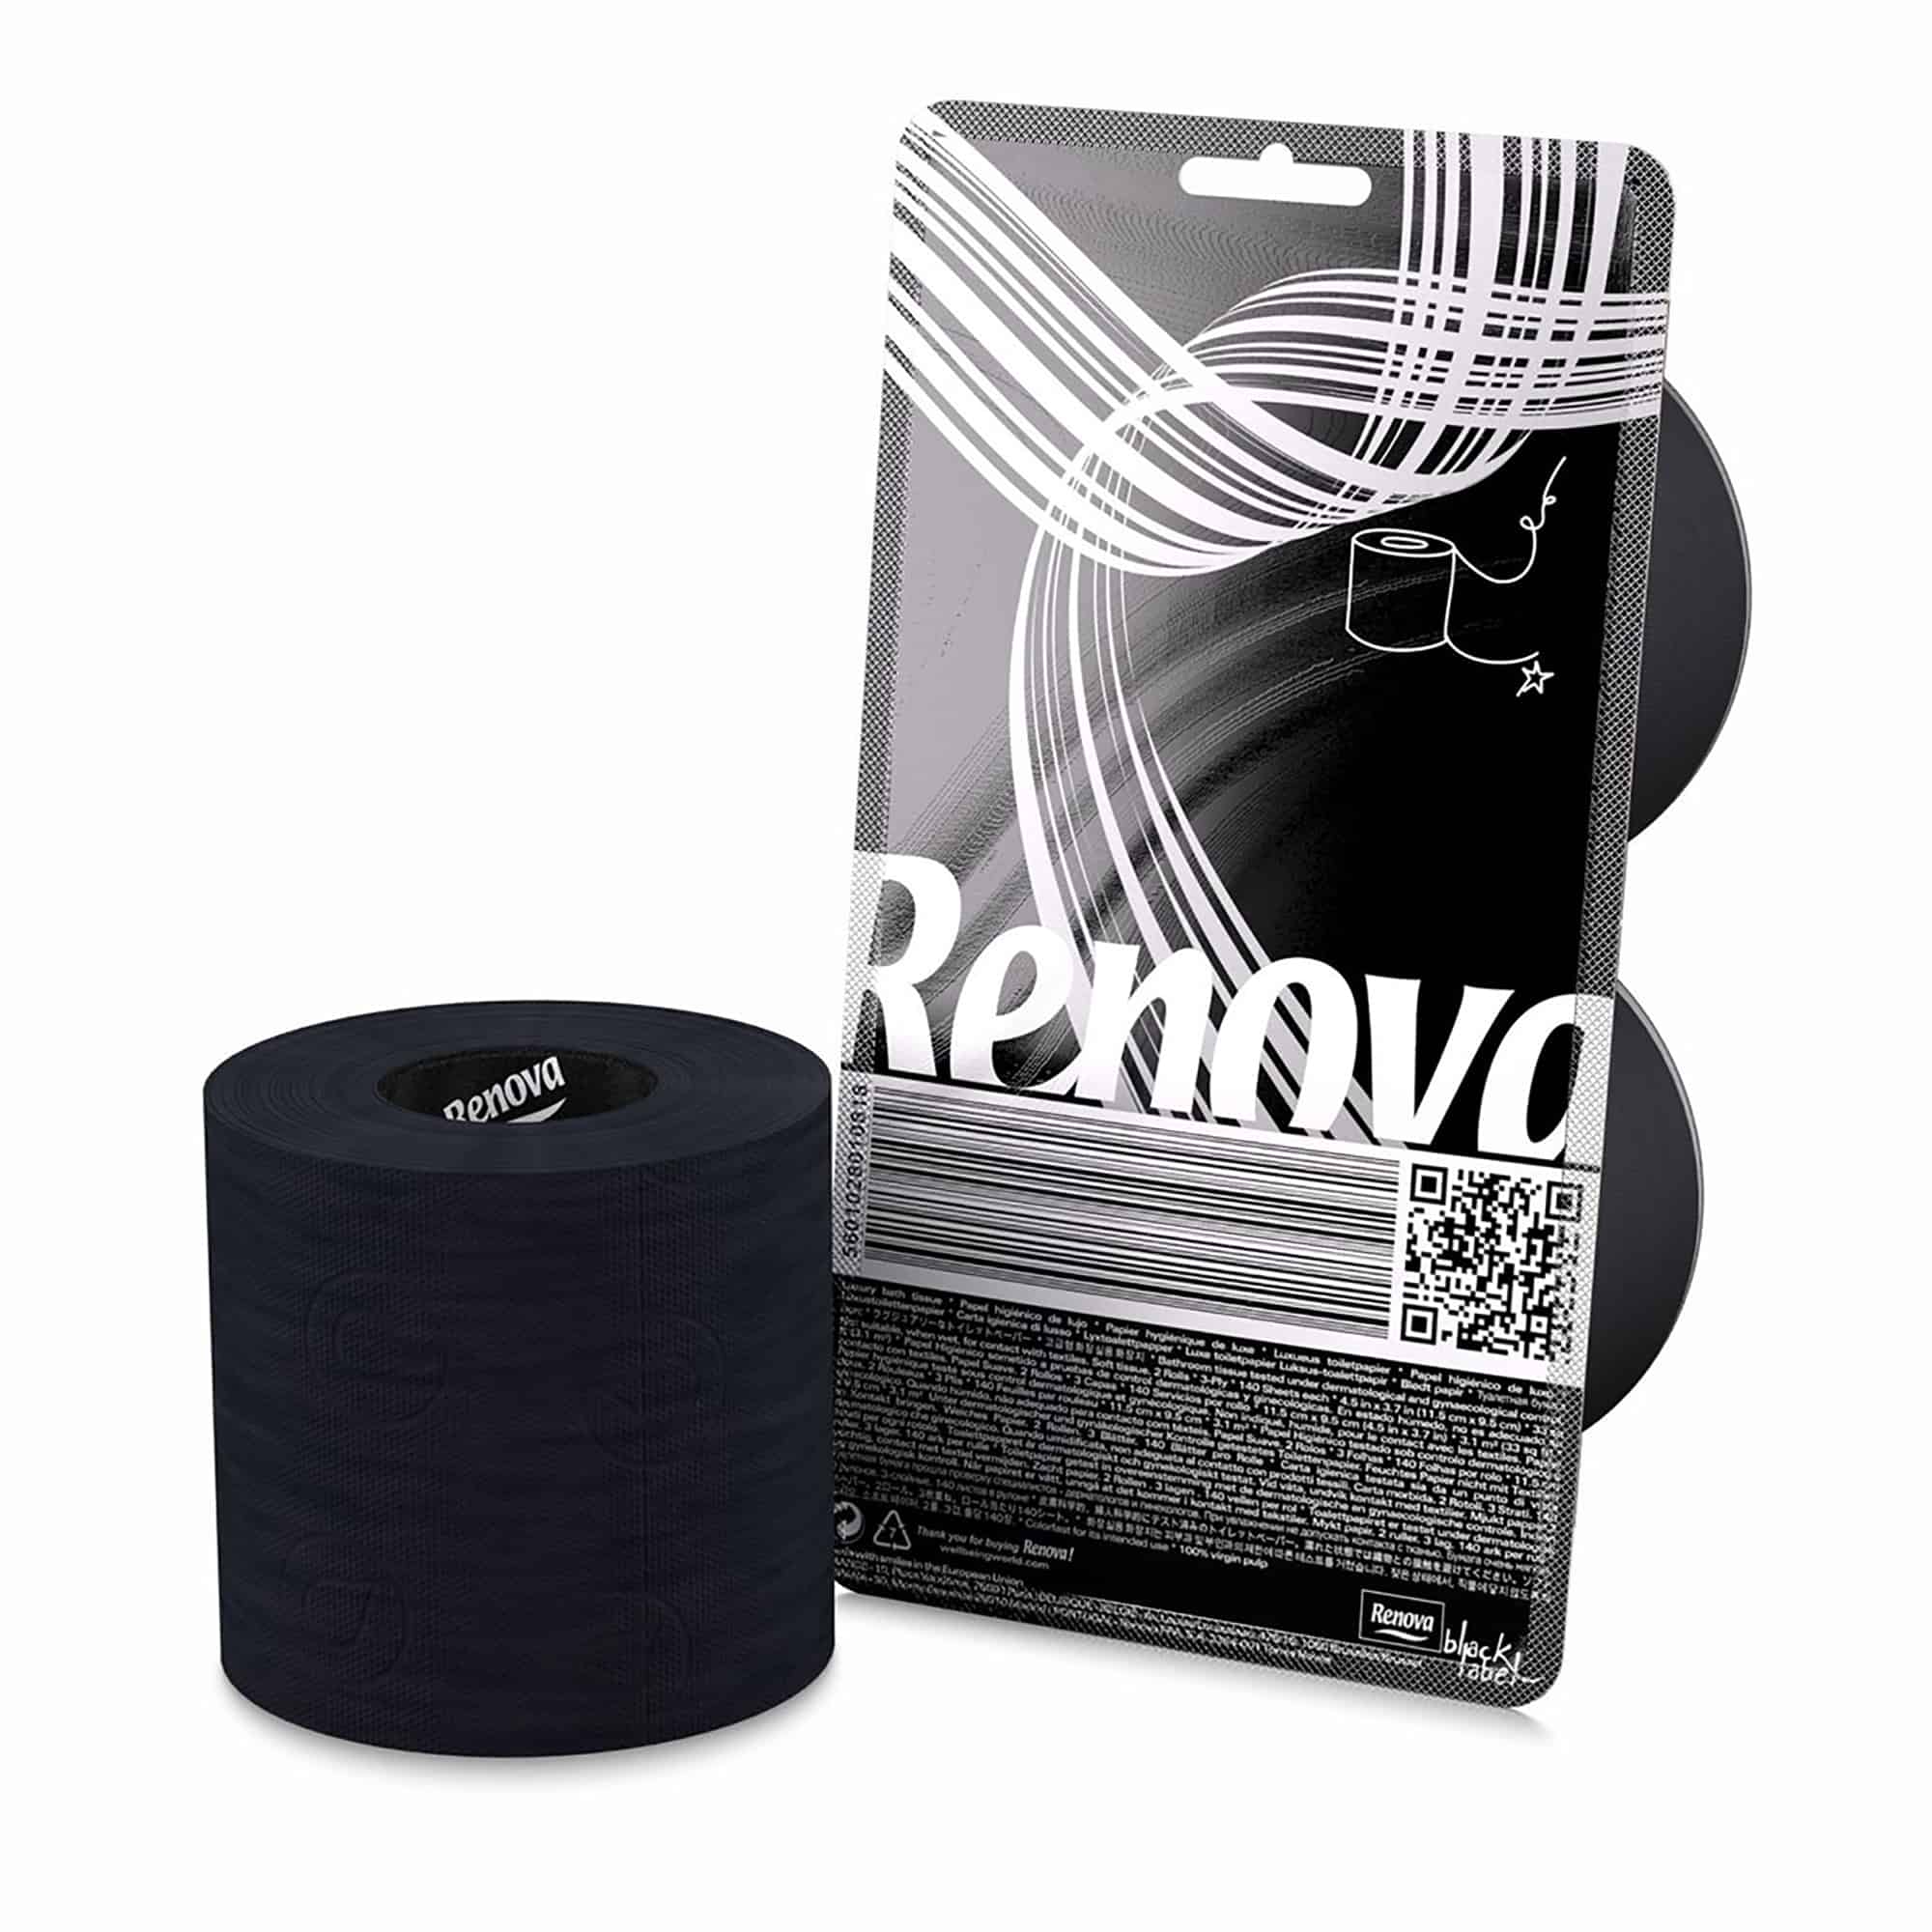 https://roll-lux.com/wp-content/uploads/2020/01/RC200064198-Black-Toilet-Paper-3-ply-Gift-box-2-Rolls-140-Premium-Quality-sheets-1-main.jpg